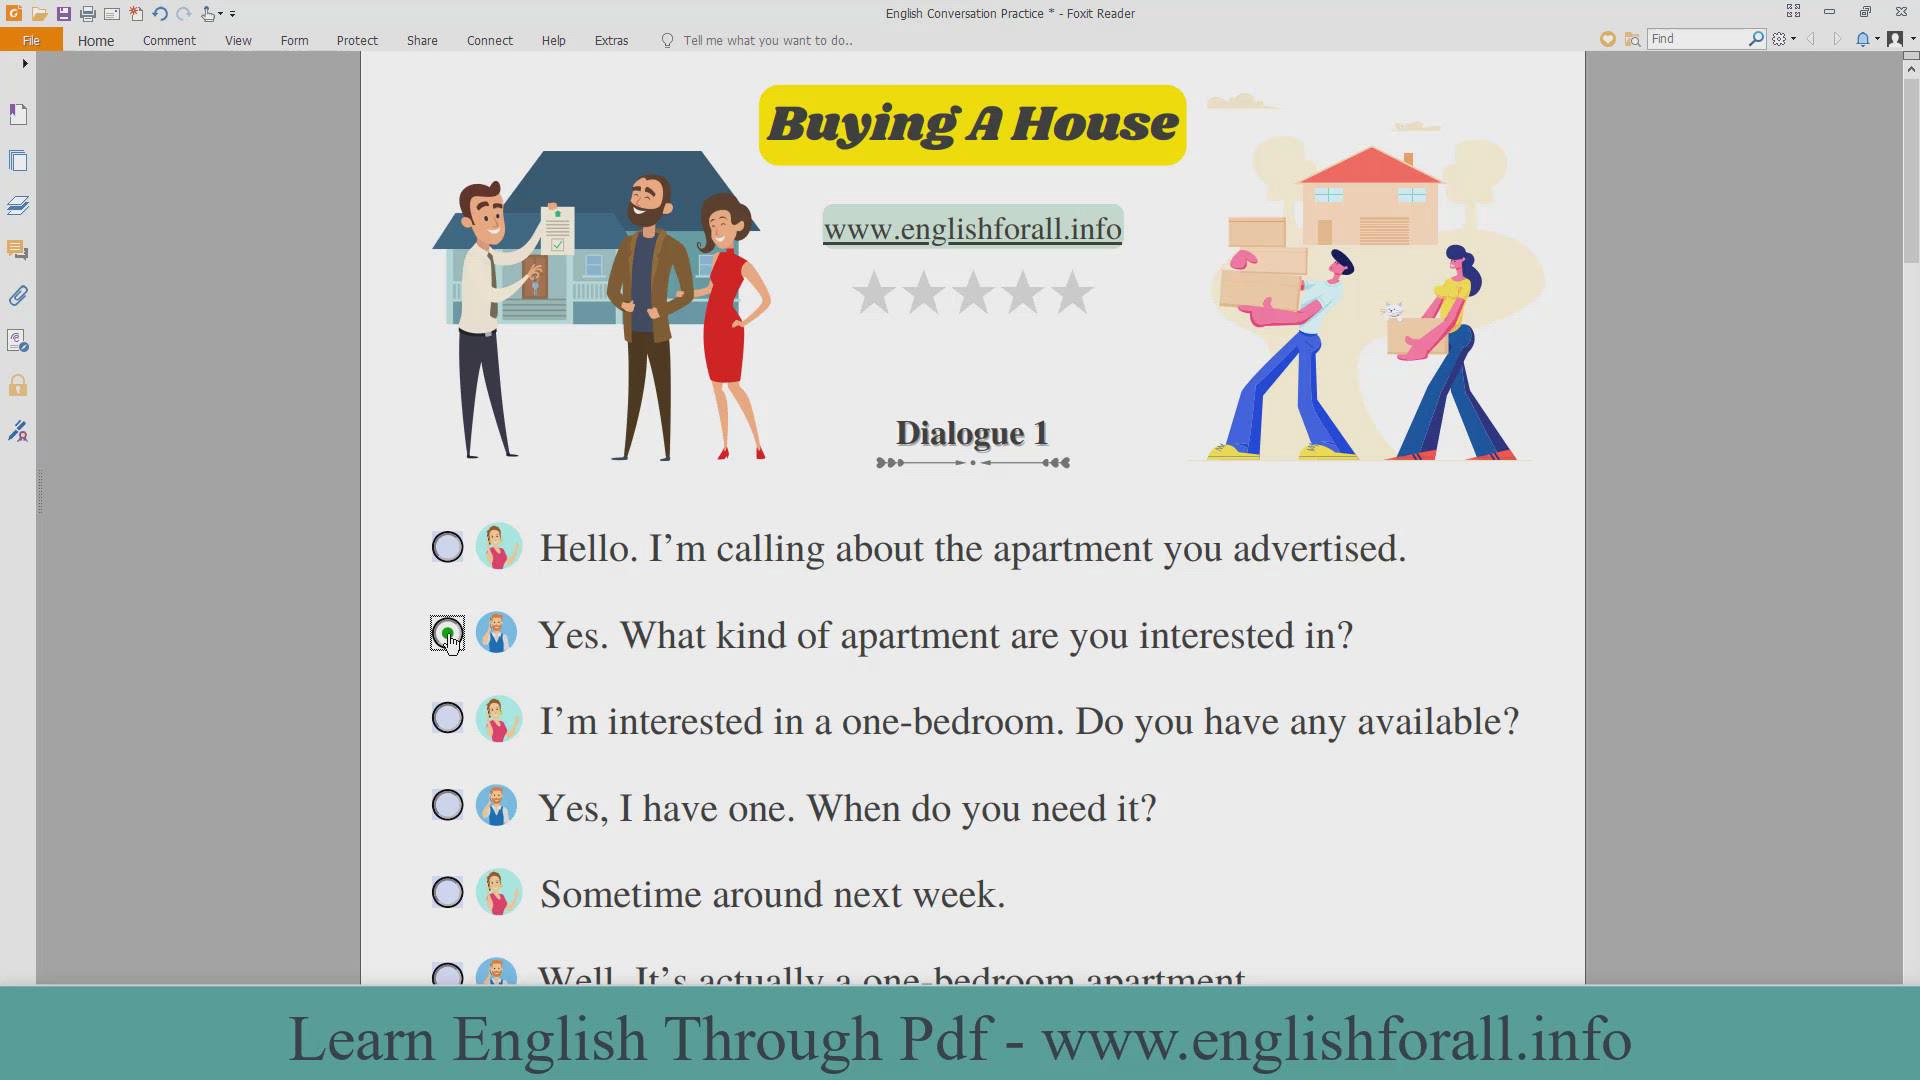 'Video thumbnail for English Conversation Practice - Buying A House'